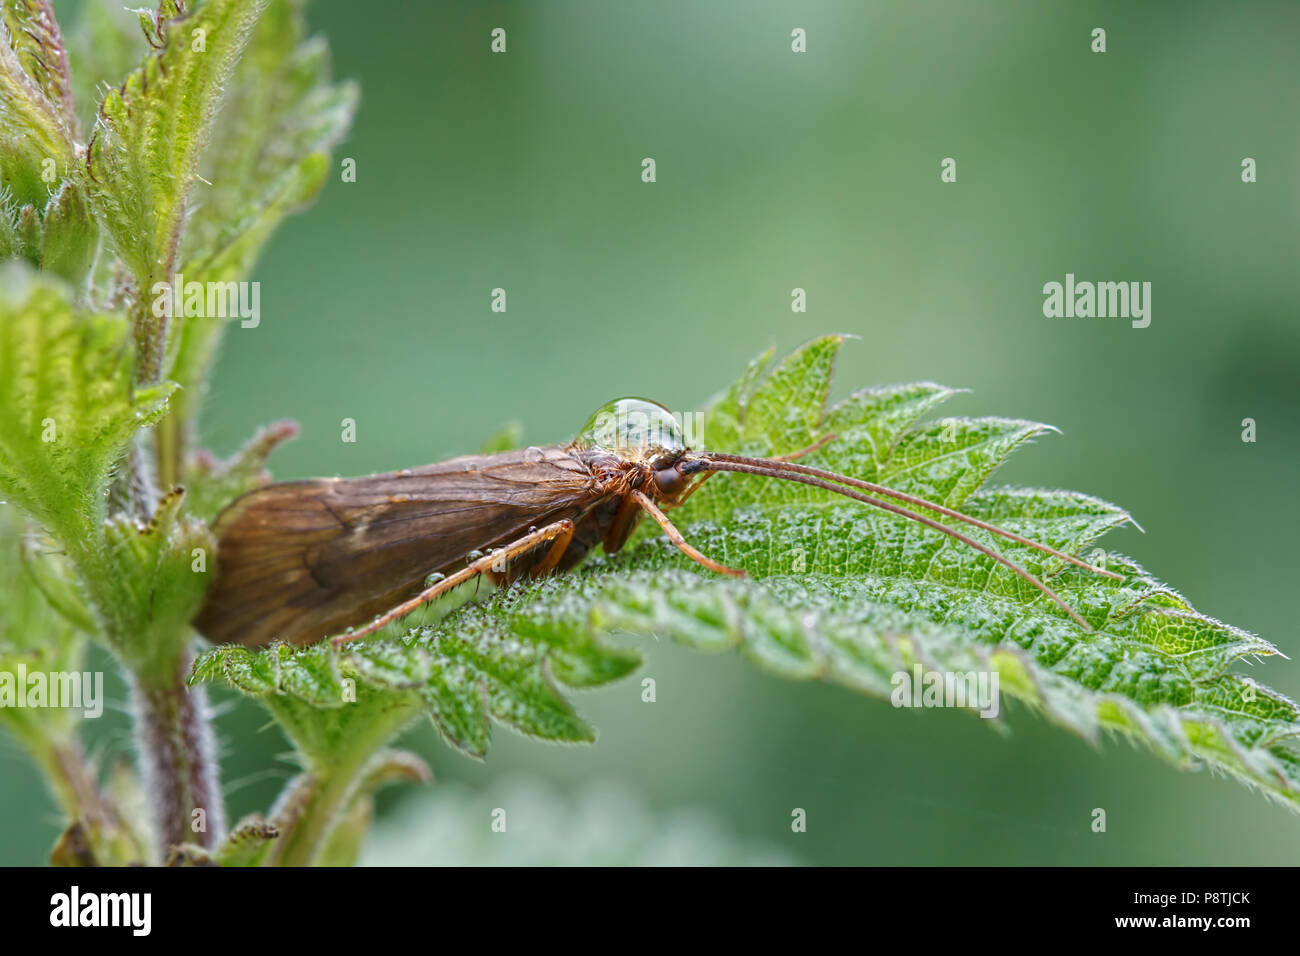 Caddis Fly with Water Drop on Head Stock Photo